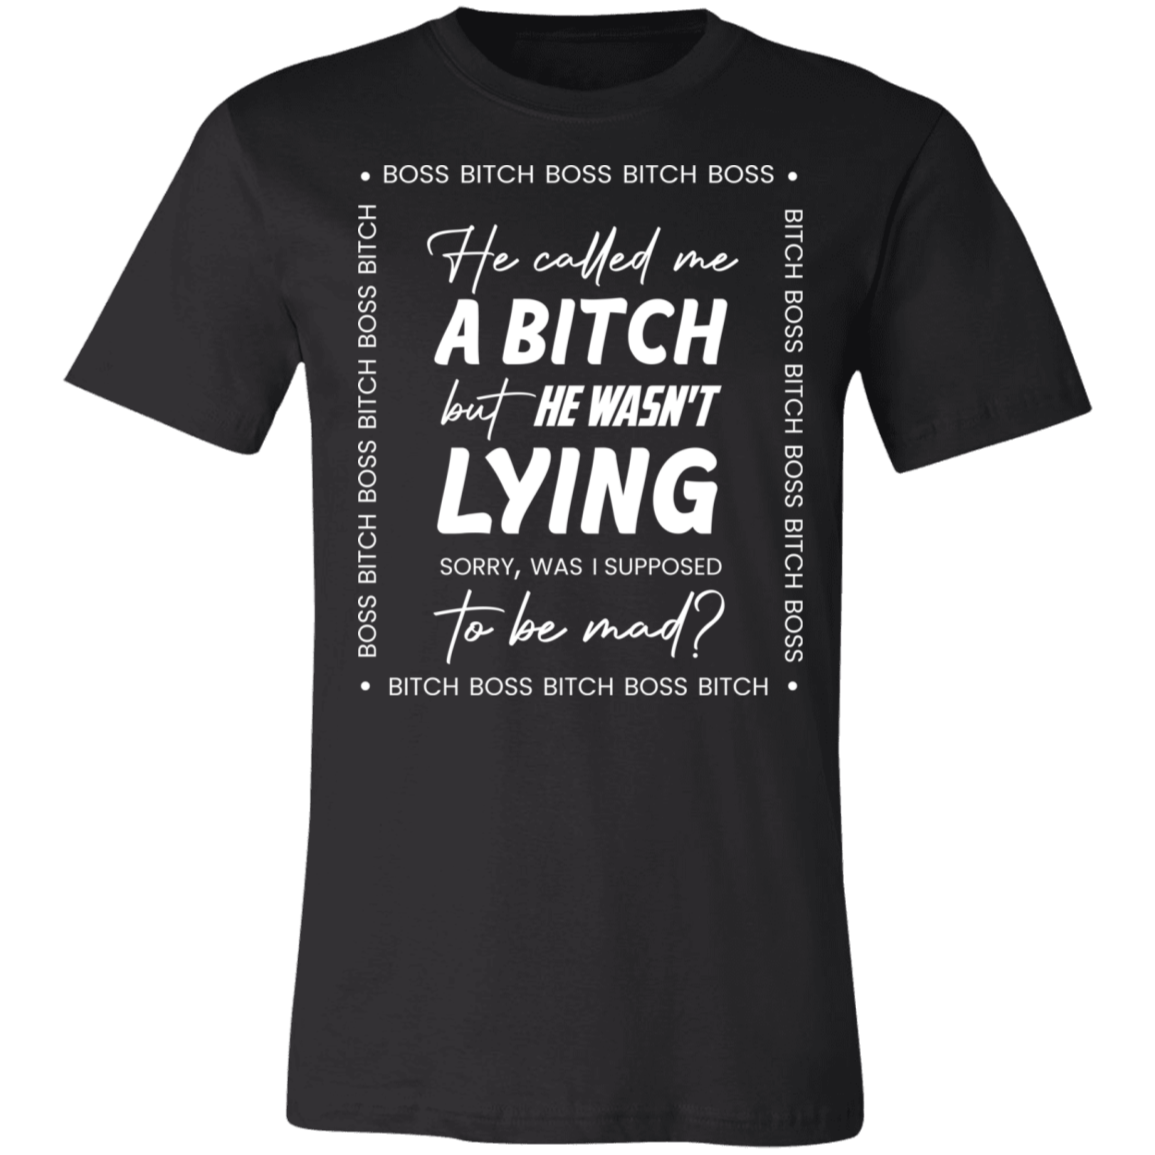 Boss B*tch Unisex Tee | He Called Me a Bitch, Was I Supposed to Be Mad